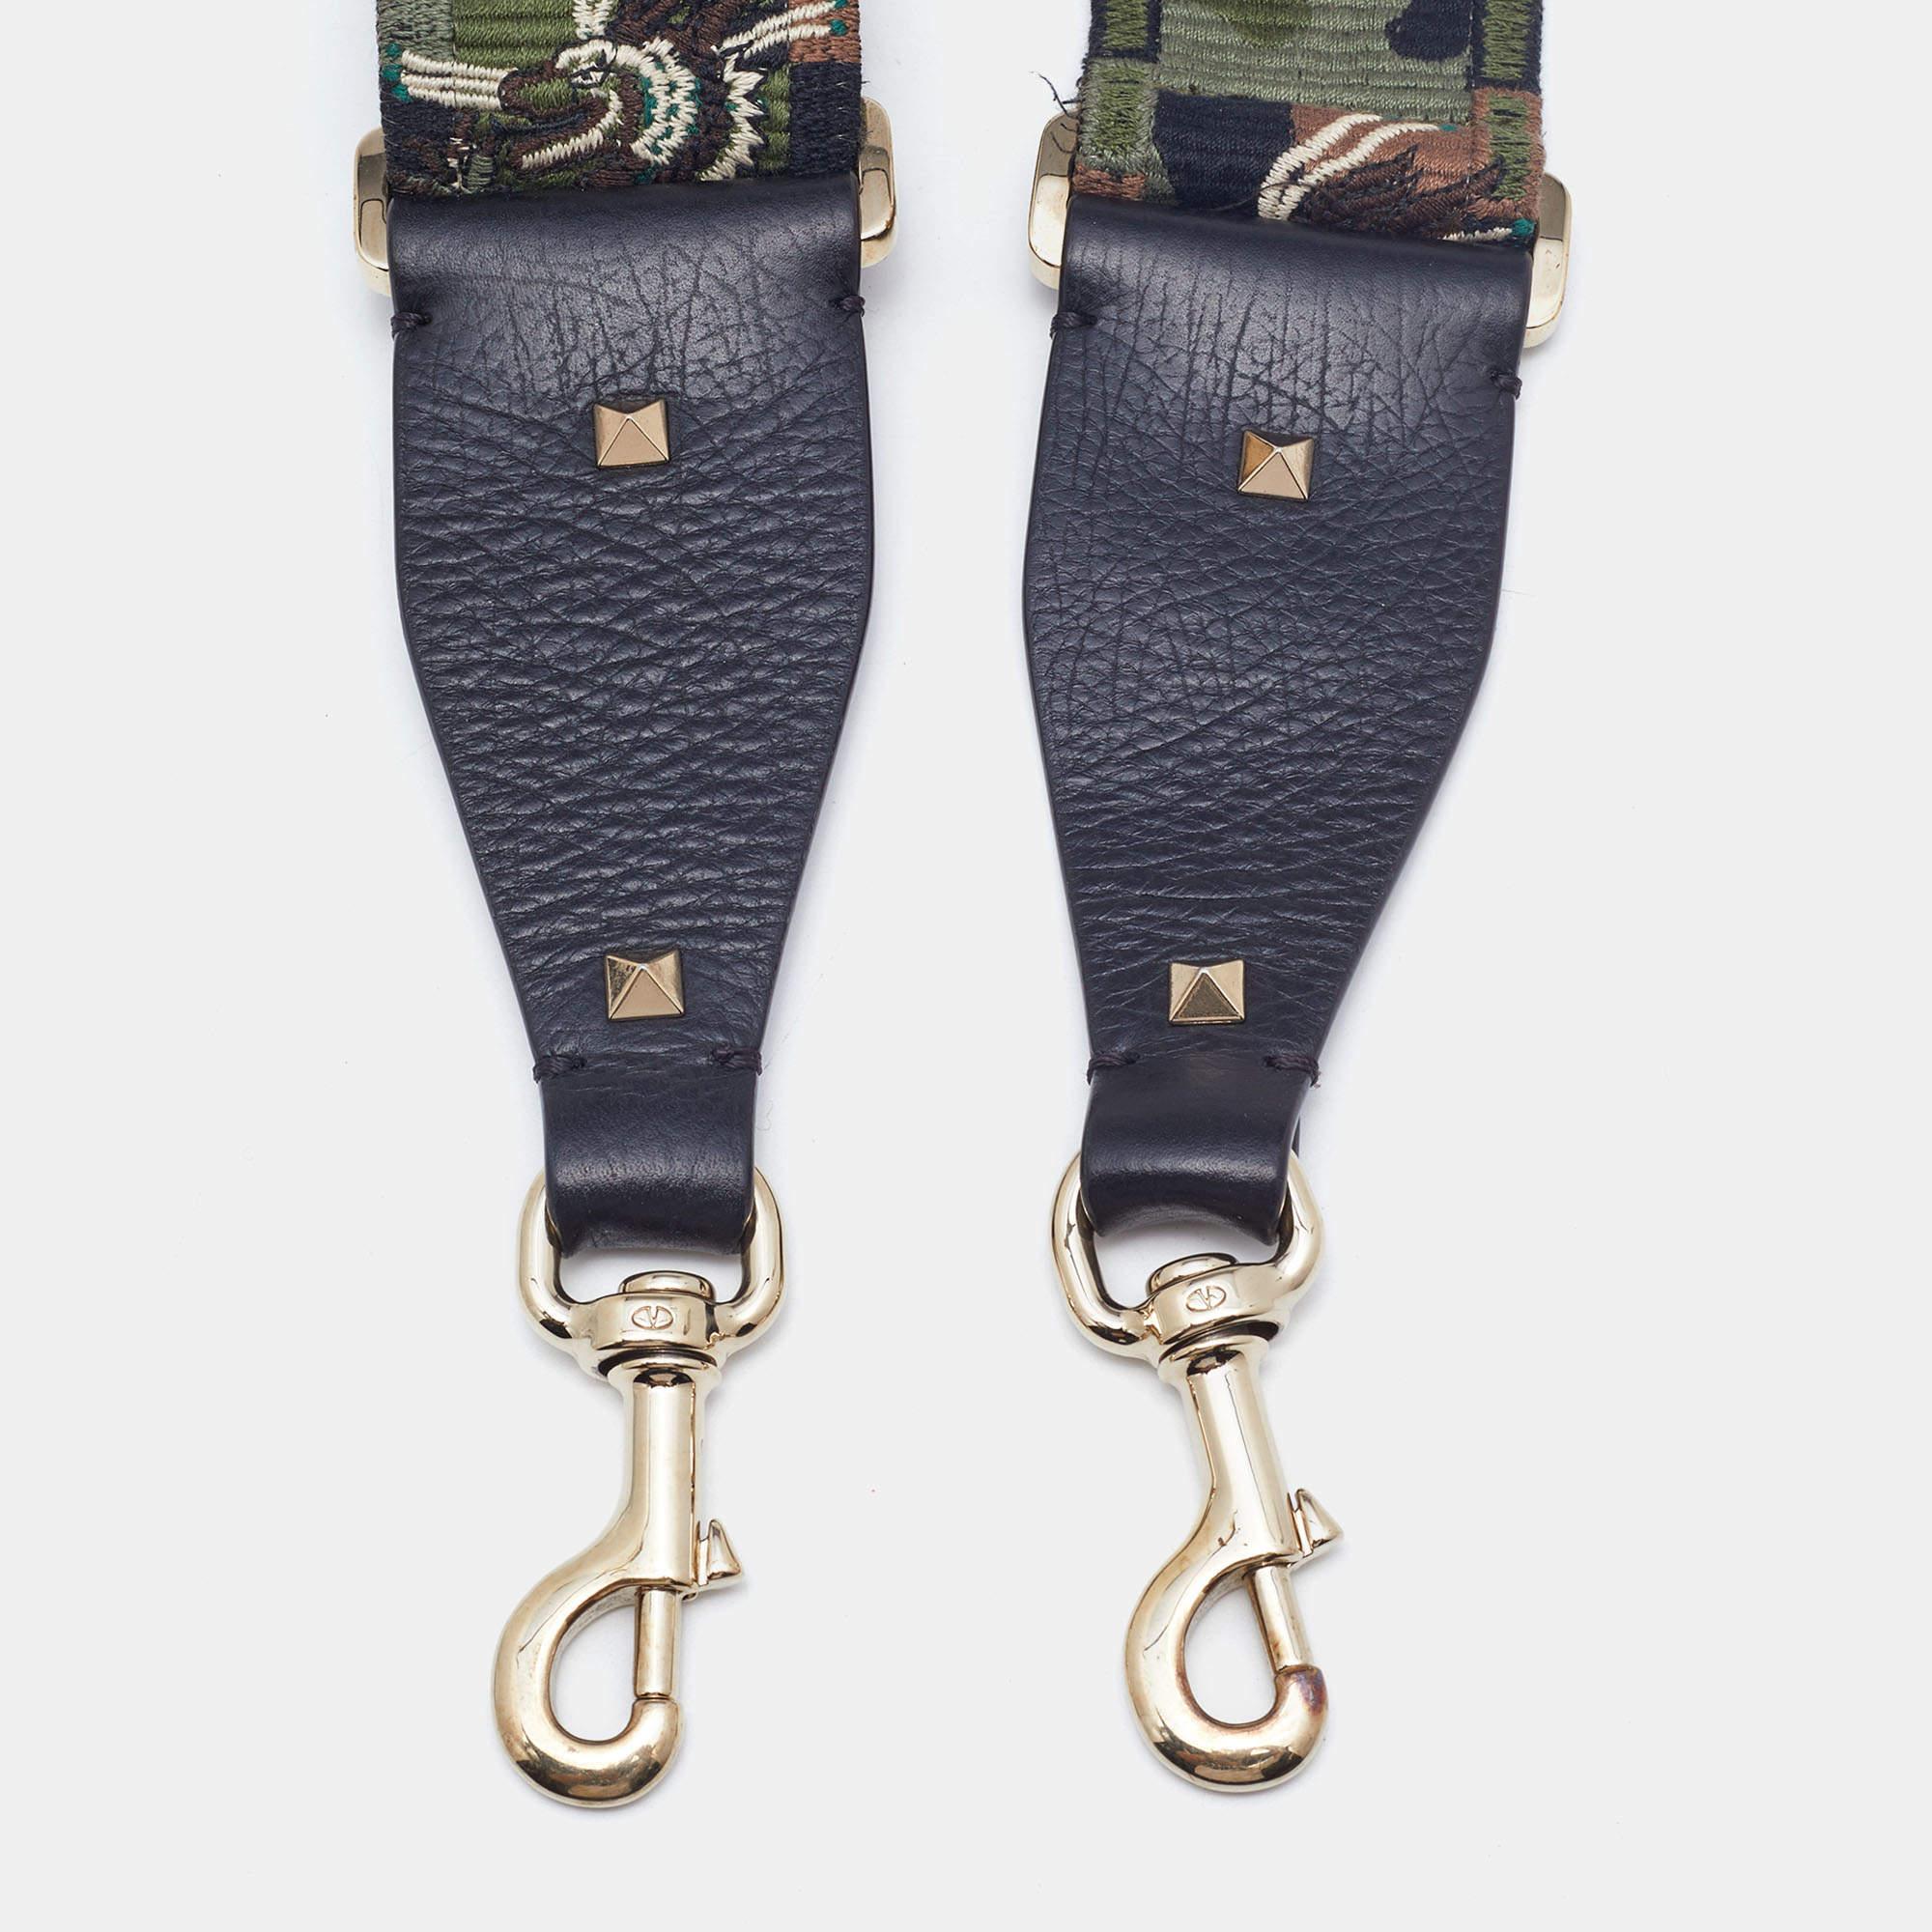 Words fall short of describing this exquisite guitar bag strap from Valentino! Crafted with love from fabric and leather, the strap flaunts their Camu design in an artistic way. The piece is adjustable, and it has two clasps to hold your bags or